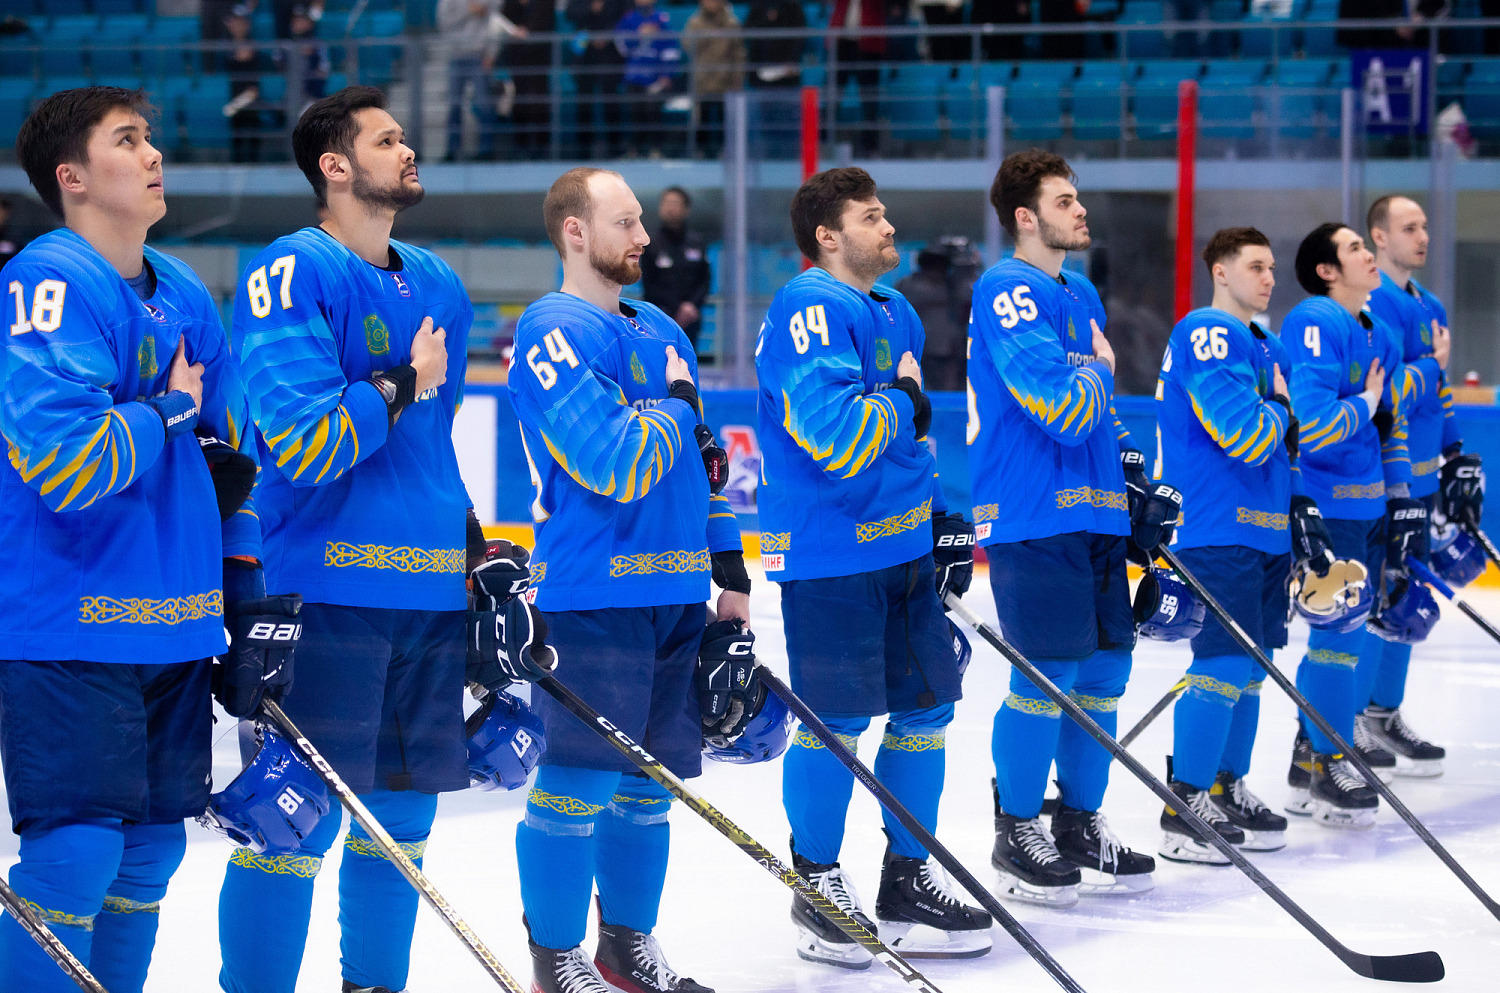 Players from Barys system will take part in an international tournament